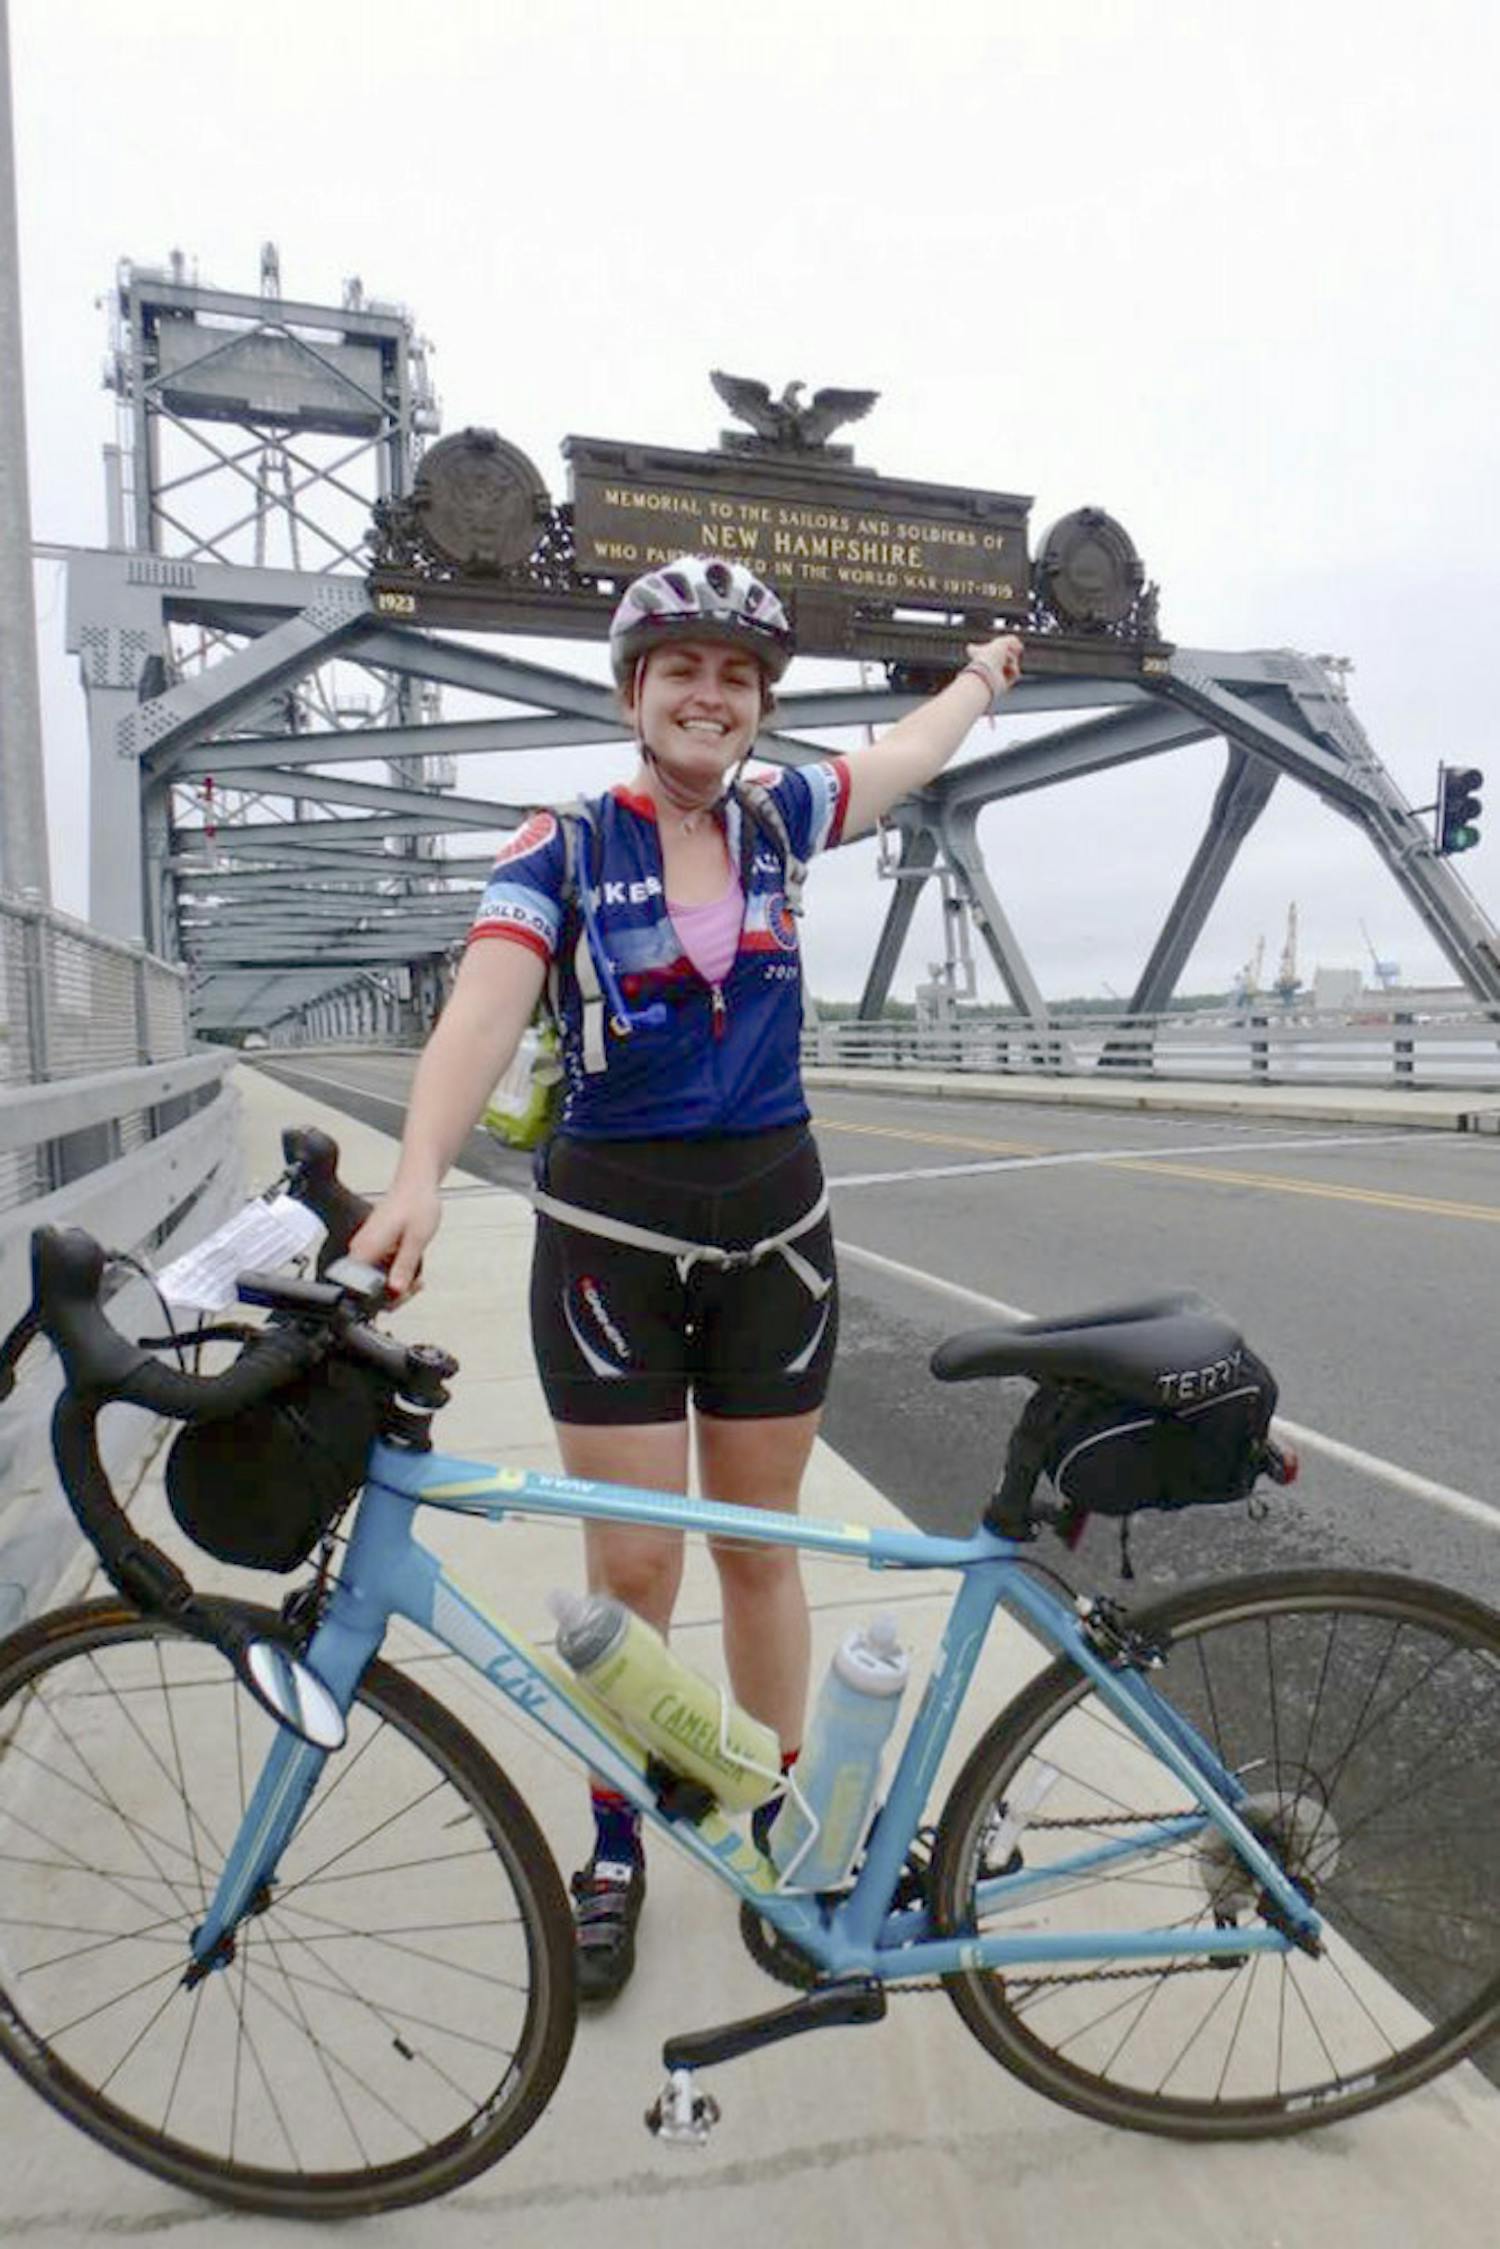 Bridget Anderson, a 22-year-old UF graduate, stands on the World War I Memorial Bridge in Portsmouth, New Hampshire, during her bike trip across the country. Another UF alum, 25-year-old Patrick Wanninkhof, died during the trip in a car accident when he and Anderson were hit by a distracted driver.